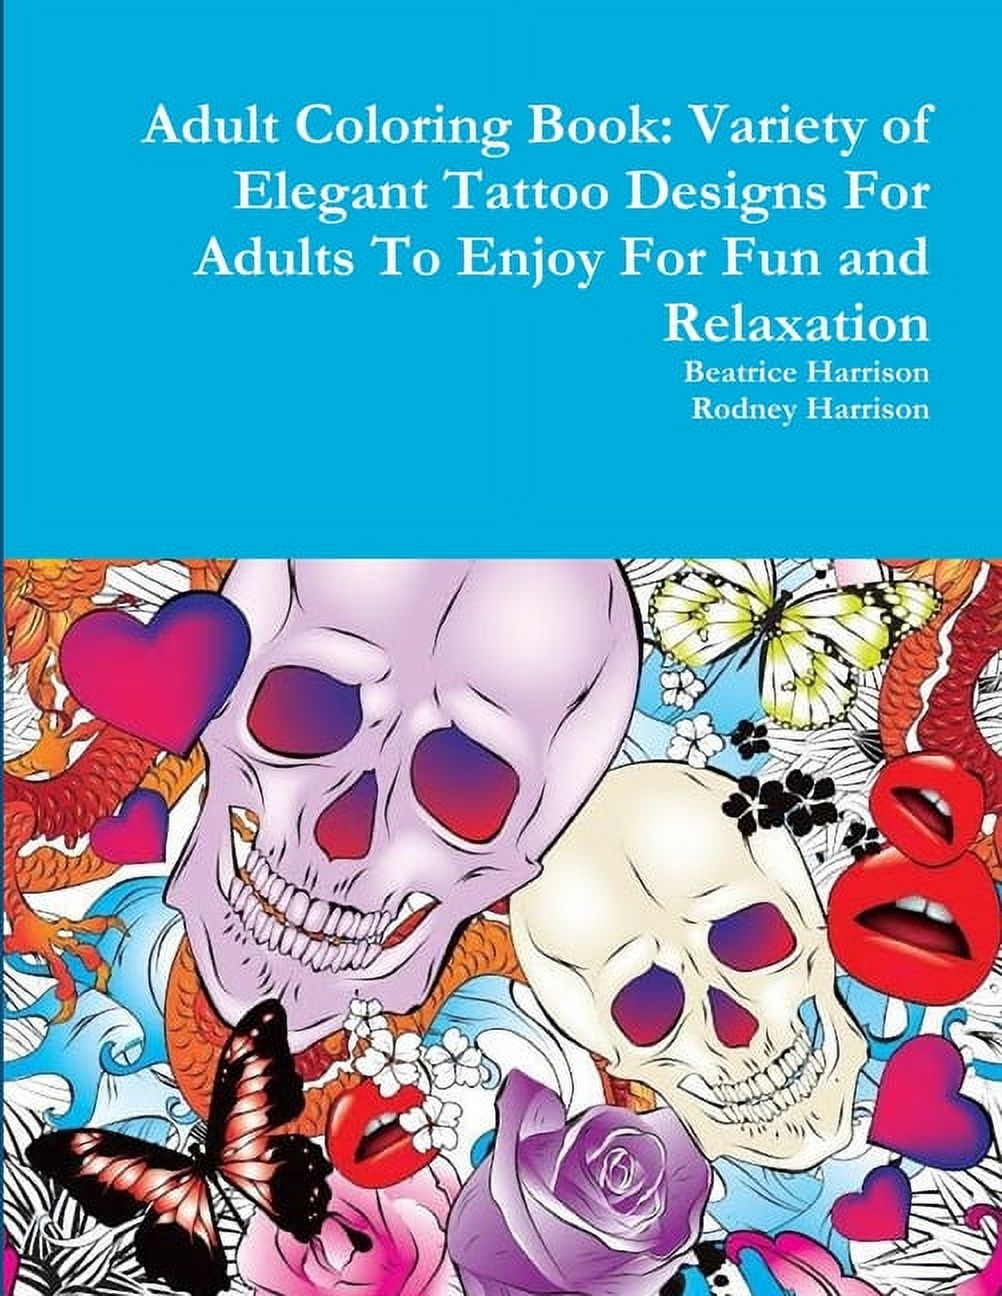 Adult Coloring Book: Variety of Elegant Tattoo Designs For Adults To Enjoy For Fun and Relaxation (Paperback) - image 1 of 3